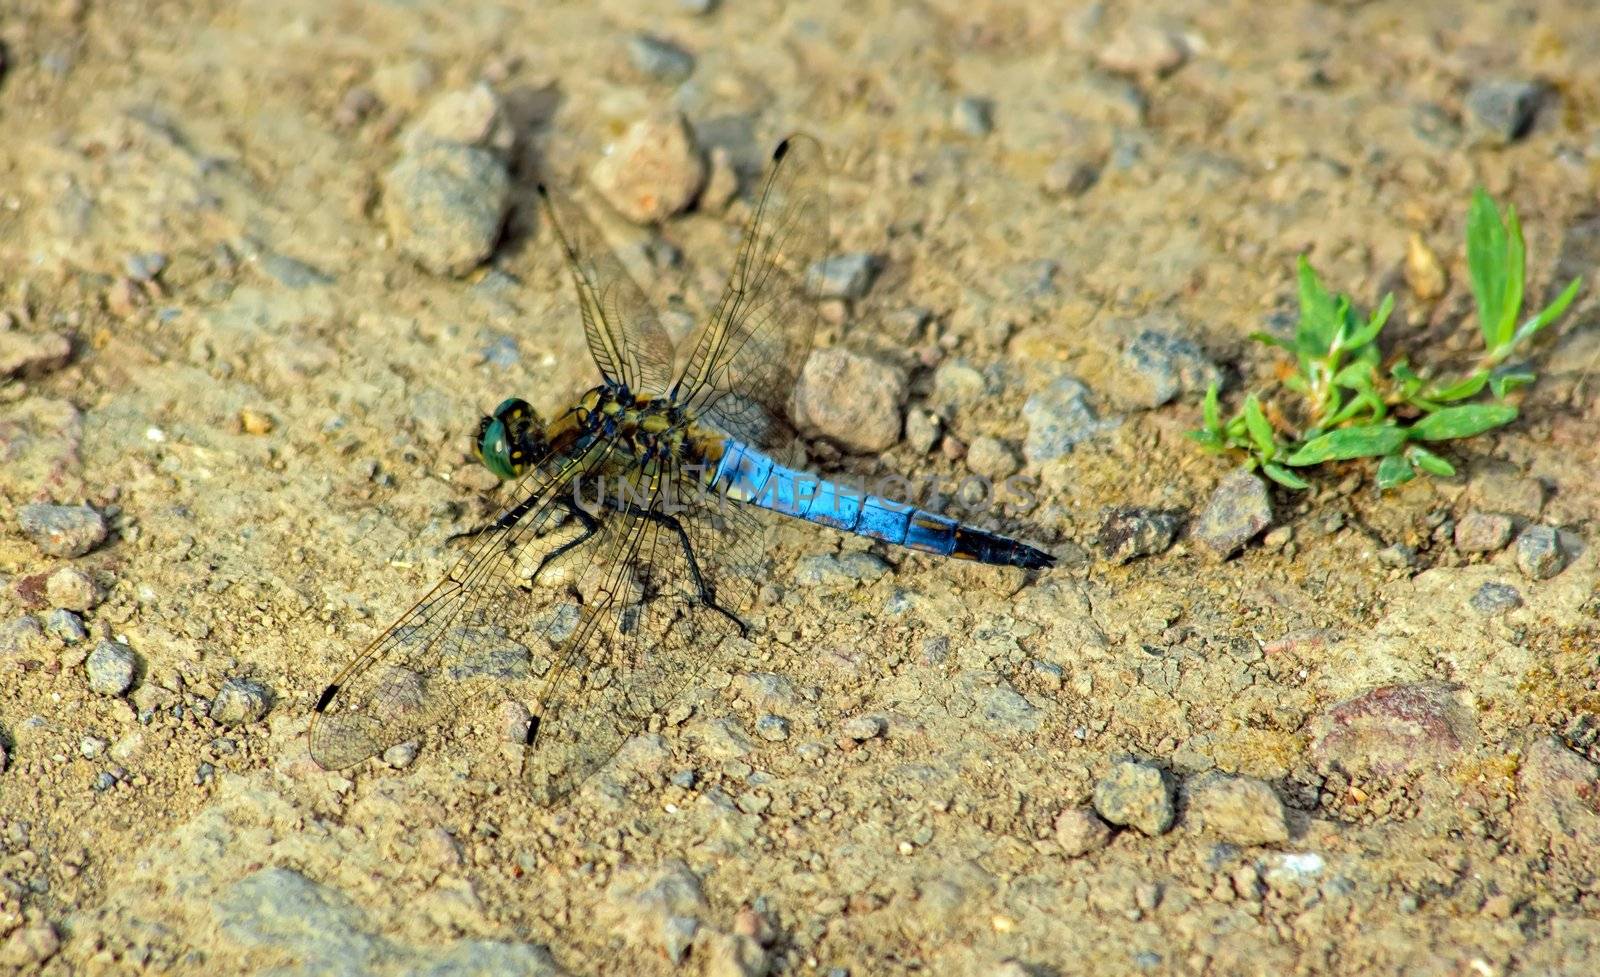 dragonfly placed on the ground by neko92vl